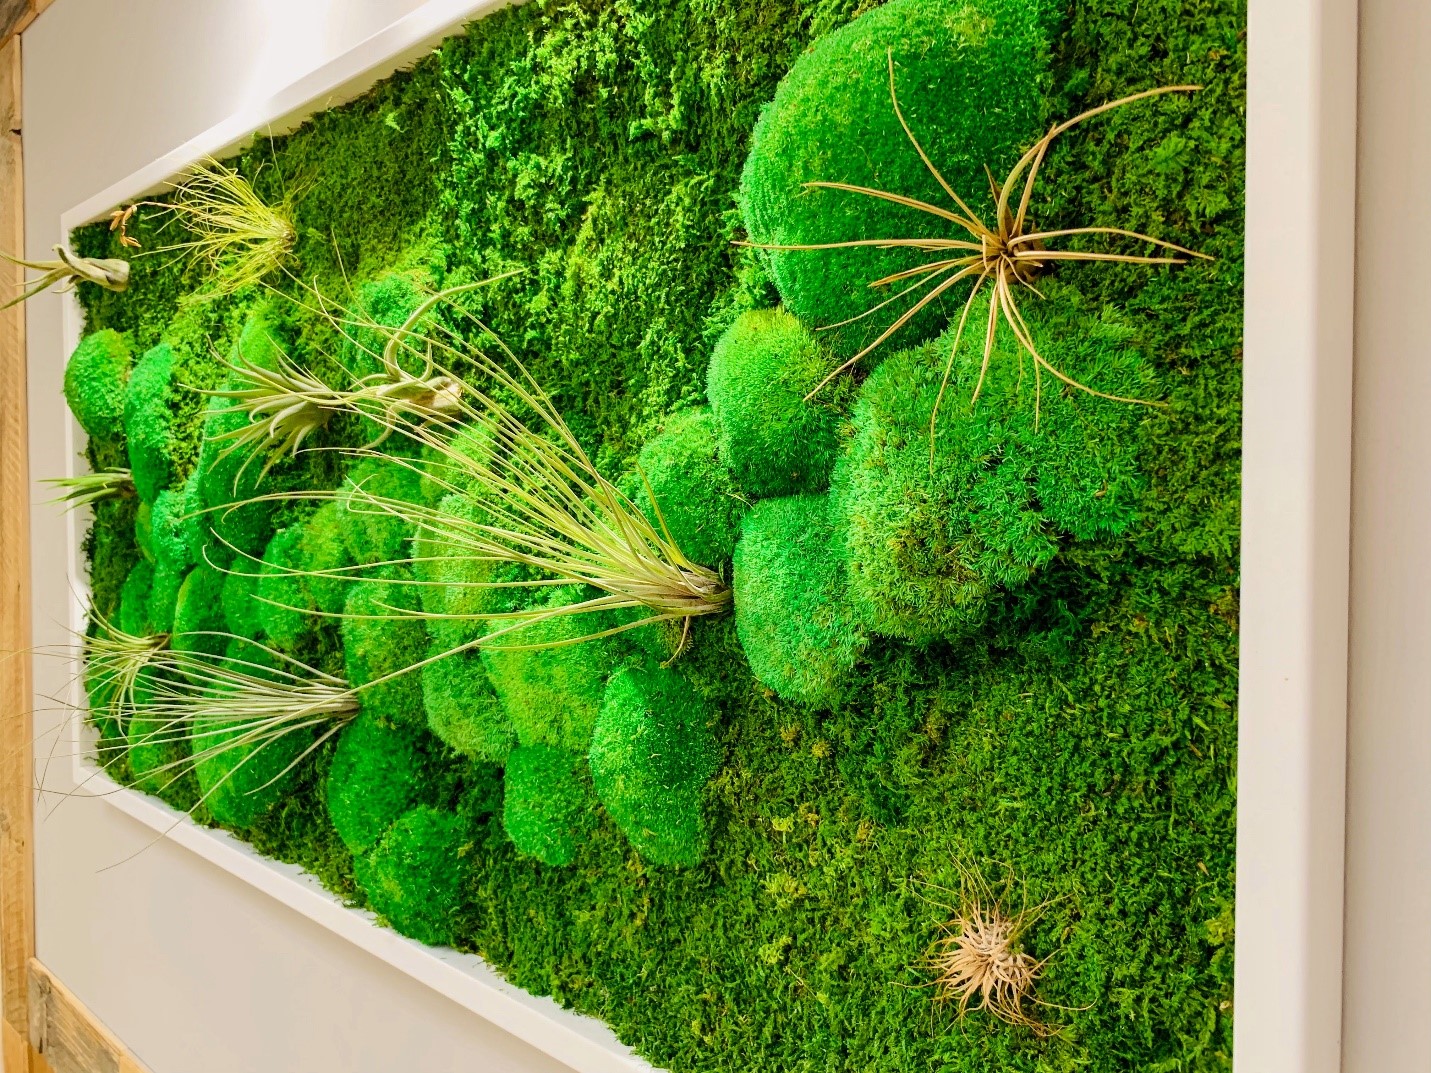 Benefits of Growing Moss Indoors - What are those? - Green Garden Tribe